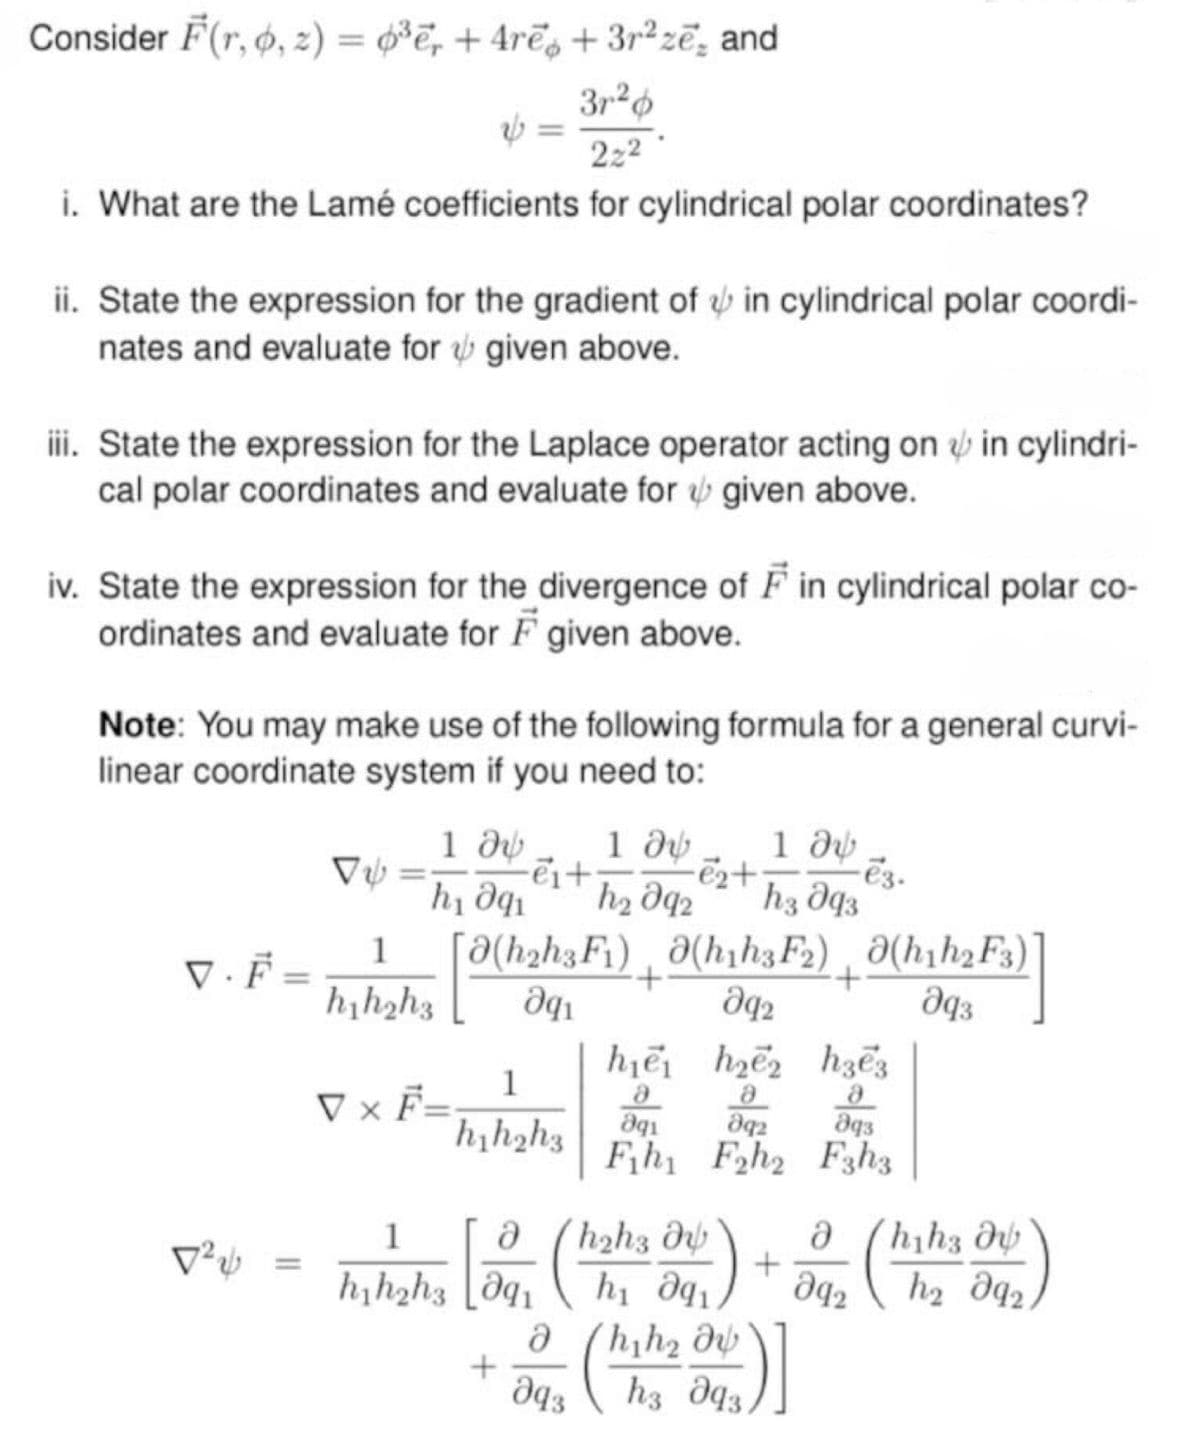 Consider F(r,o, z) = 0³ē, +4rē + 3r²ze, and
3r2
222
i. What are the Lamé coefficients for cylindrical polar coordinates?
ii. State the expression for the gradient of in cylindrical polar coordi-
nates and evaluate for given above.
iii. State the expression for the Laplace operator acting on in cylindri-
cal polar coordinates and evaluate for given above.
iv. State the expression for the divergence of F in cylindrical polar co-
ordinates and evaluate for F given above.
Note: You may make use of the following formula for a general curvi-
linear coordinate system if you need to:
-ei+
-e2+·
1 მს 1 მს 1 მს
իլ Օզի h₂ 92 hვ მყვ
-ē3.
V.F [ ǝ(hahaF¹)¸ǝ(hṛhaF2) Ə(hıh¸Fs)
VÝ
1
+
=
h₁h2h3
aq2
მივ
h₁e he
hзe3
1
V × F=
მ
8
მ
h₁h2h3
Օգ
892
ддз
Fihi F2h2 F3h3
1
მ
h2h3 მს
მ
hha მს
12√
+
=
h₁h2h3 91
իլ Օզլ
მ42
հ2 Օզչ
მ
hh2 მს
+
მ43
h3 93.